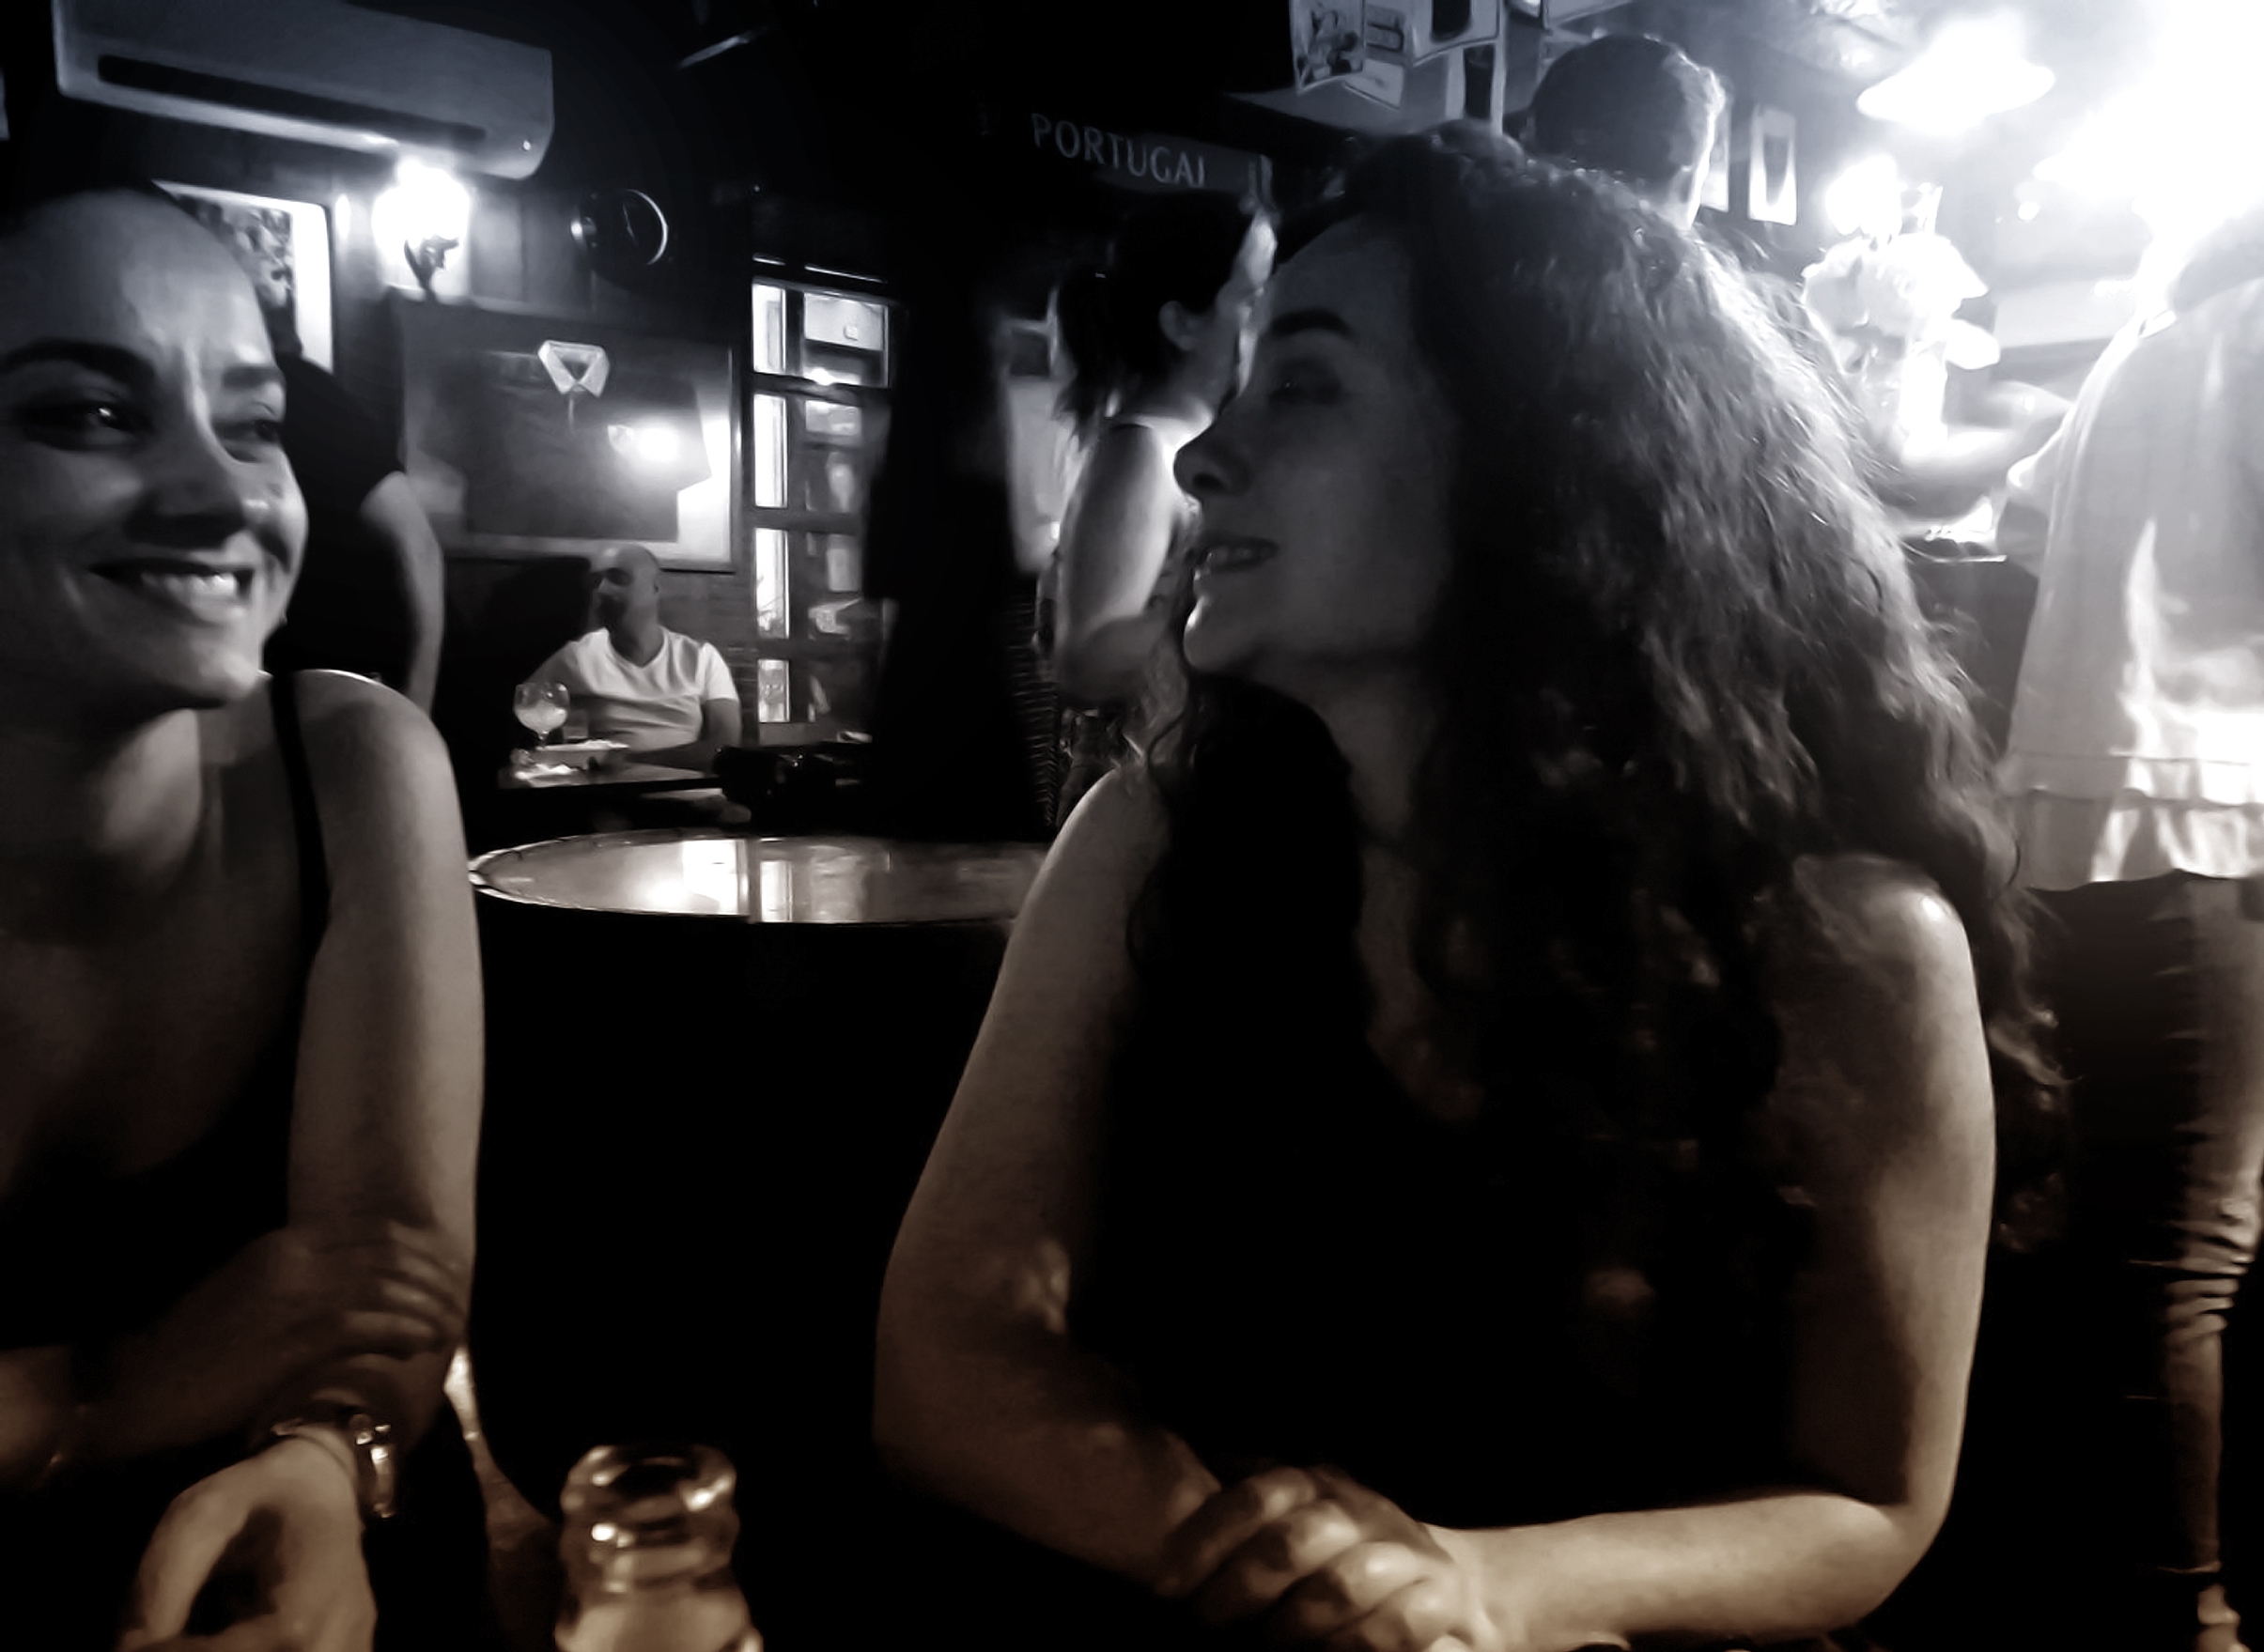 Women at a bar talking and smiling - retro - dark fuzzy looks photo